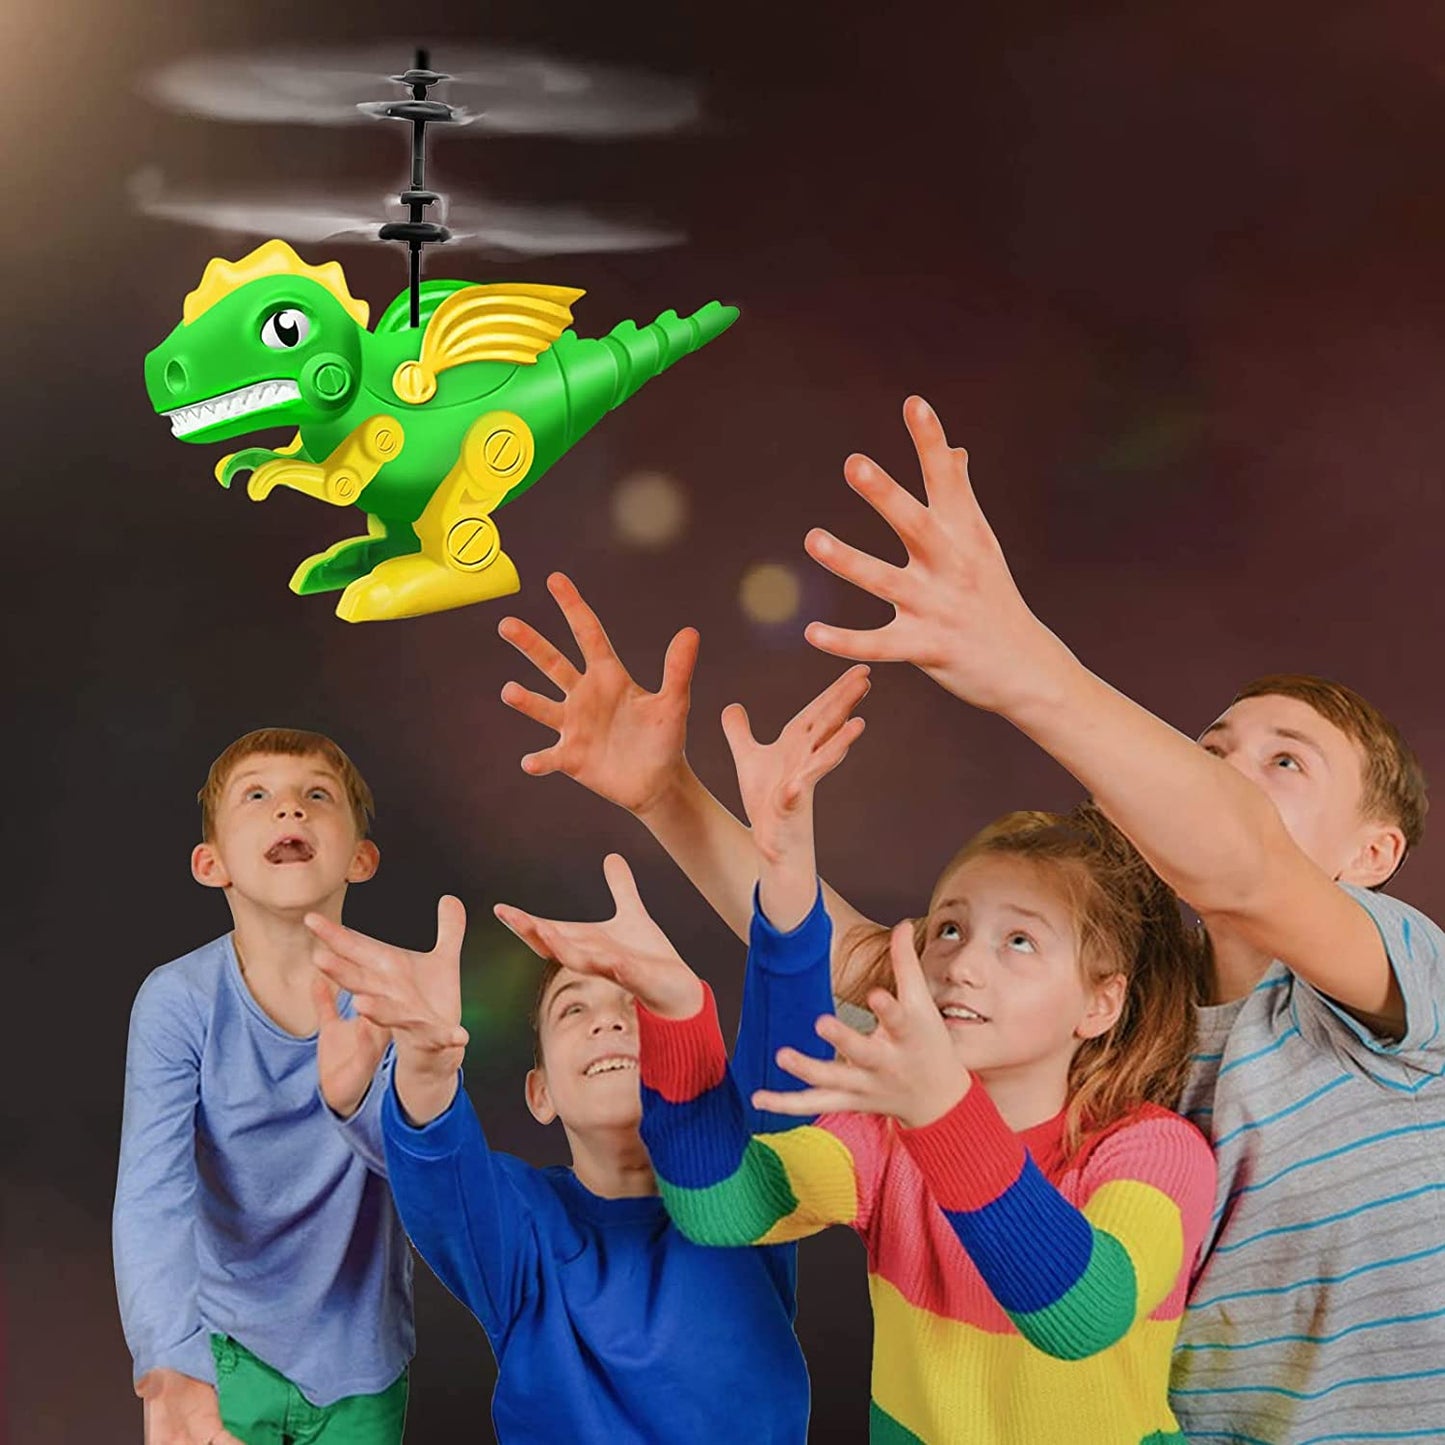 Flying Dinosaur Helicopter Robot Ball Drone Toy for Kids Boys Year Old Gifts, 2022 New Dinosaur World Gifts